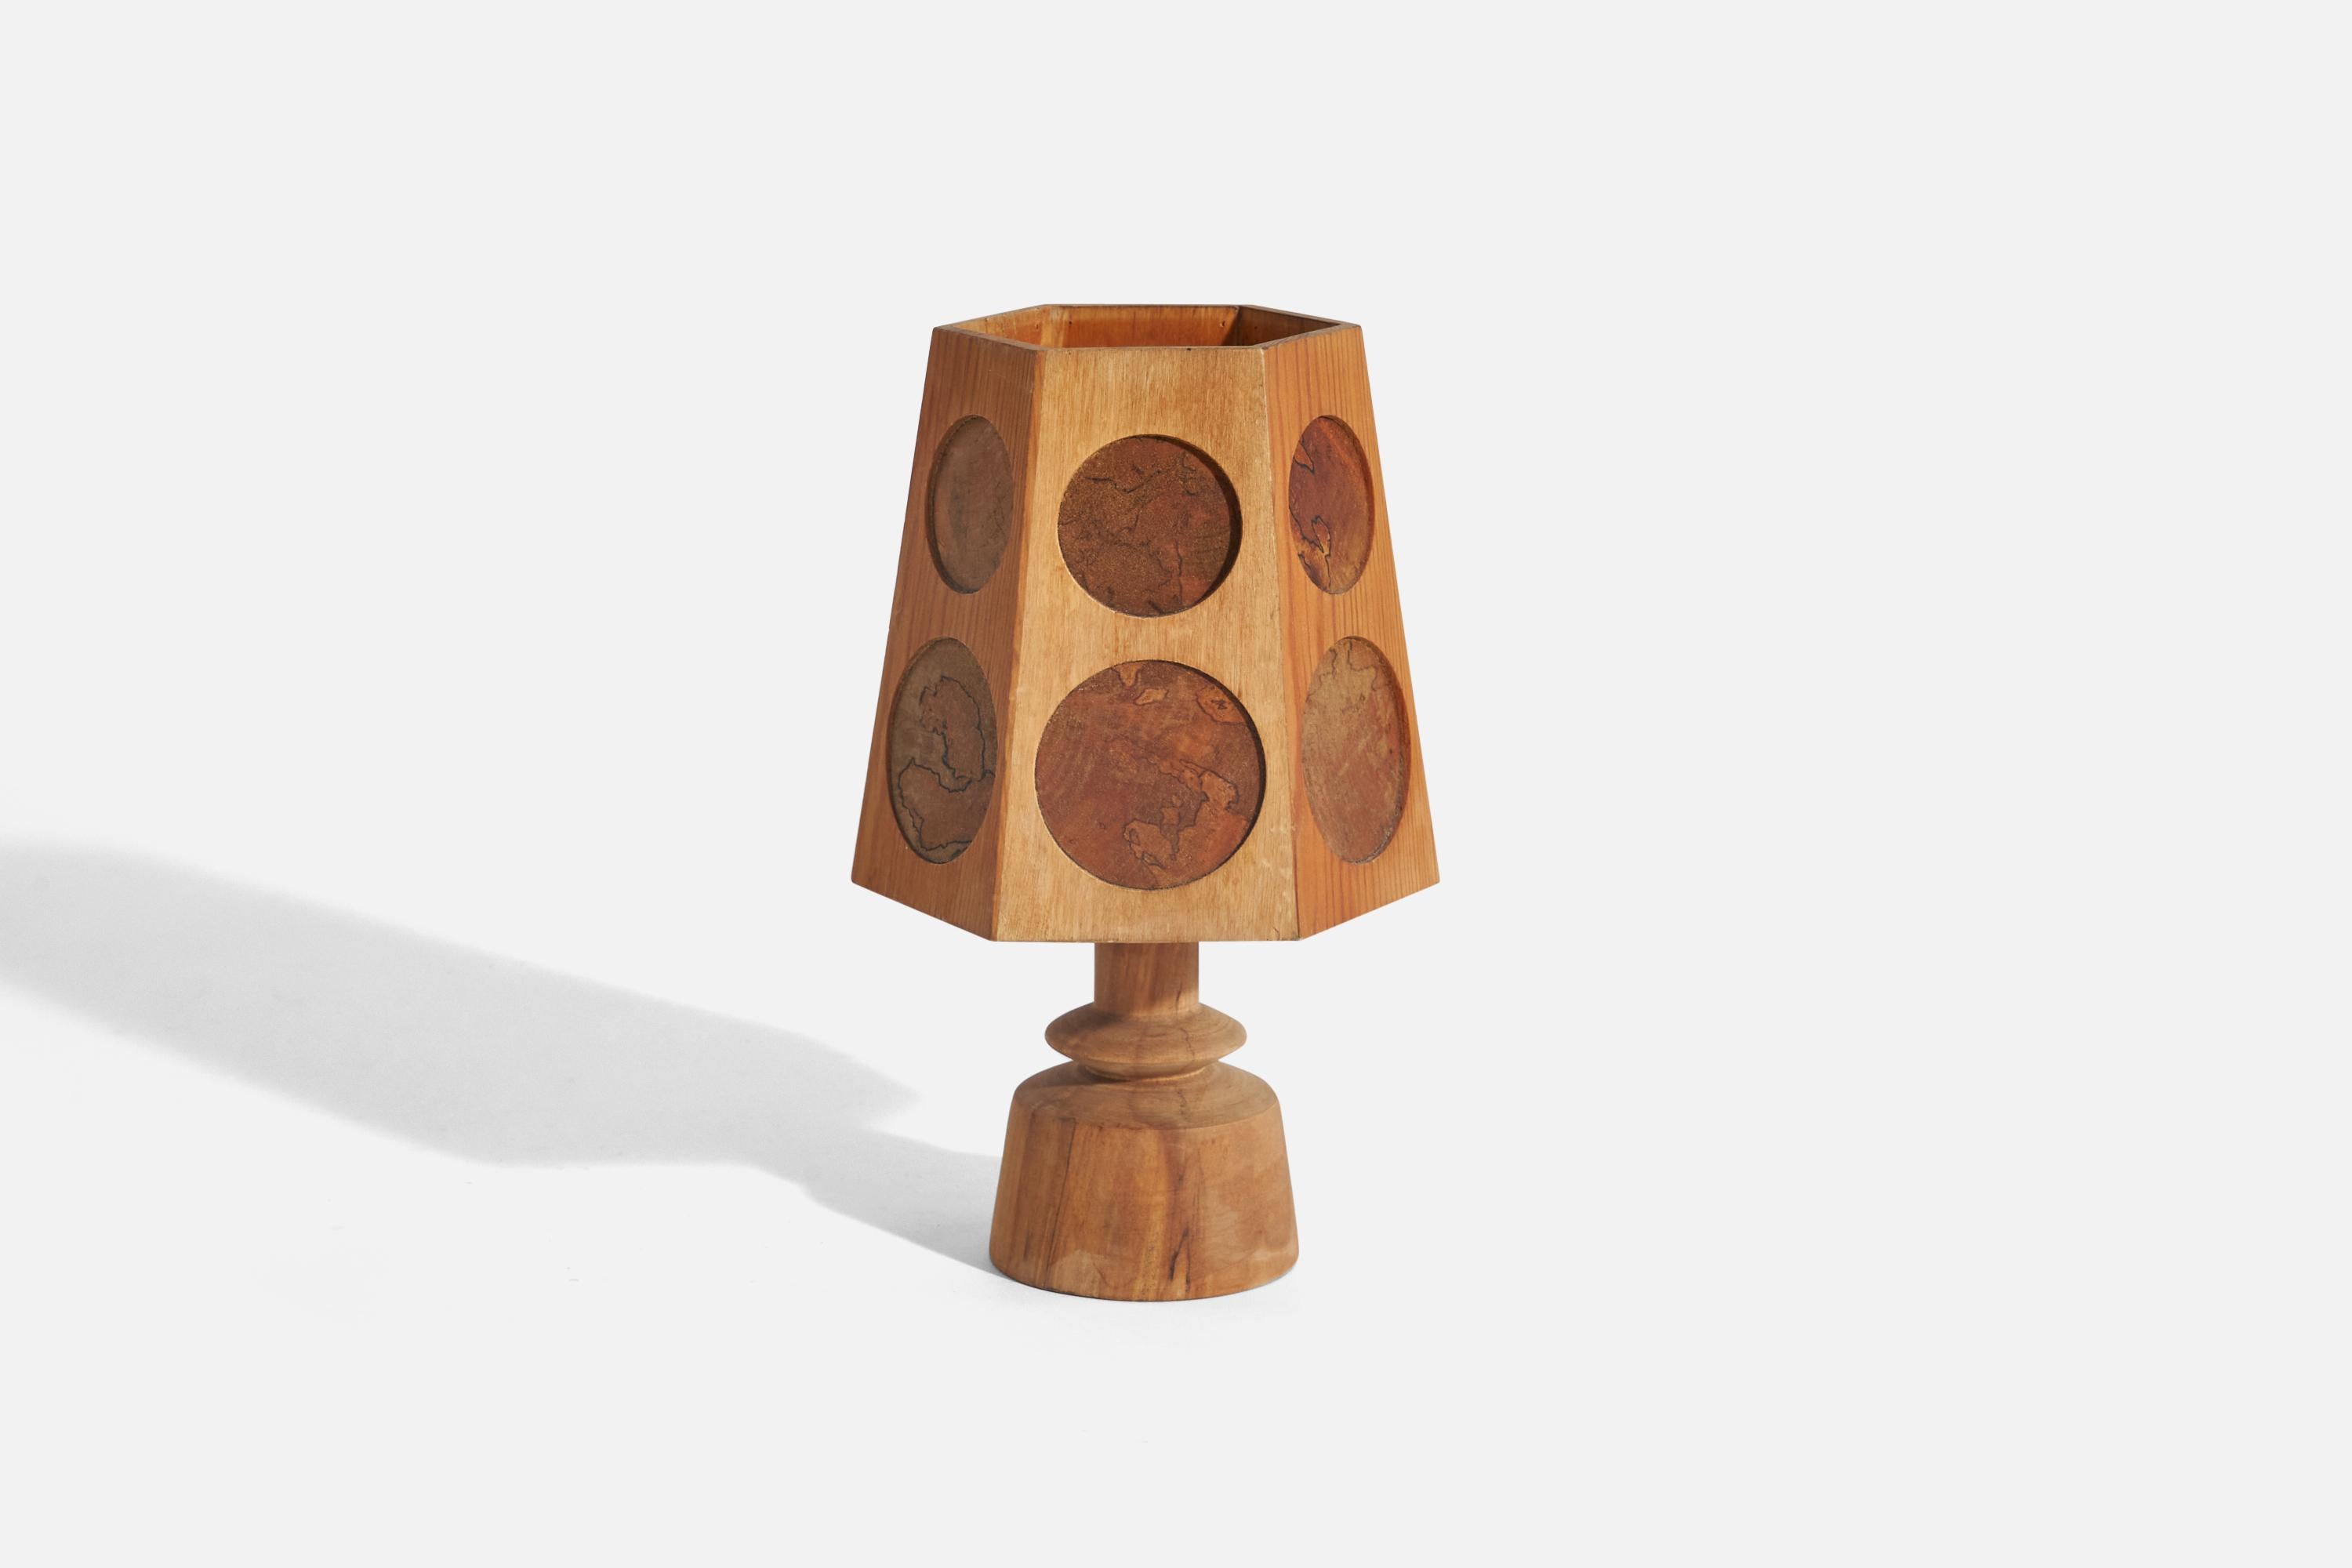 A pine and masur birch table lamp designed and produced in Sweden, 1970s.

Socket takes E-14 bulb.
There is no maximum wattage stated on the fixture.